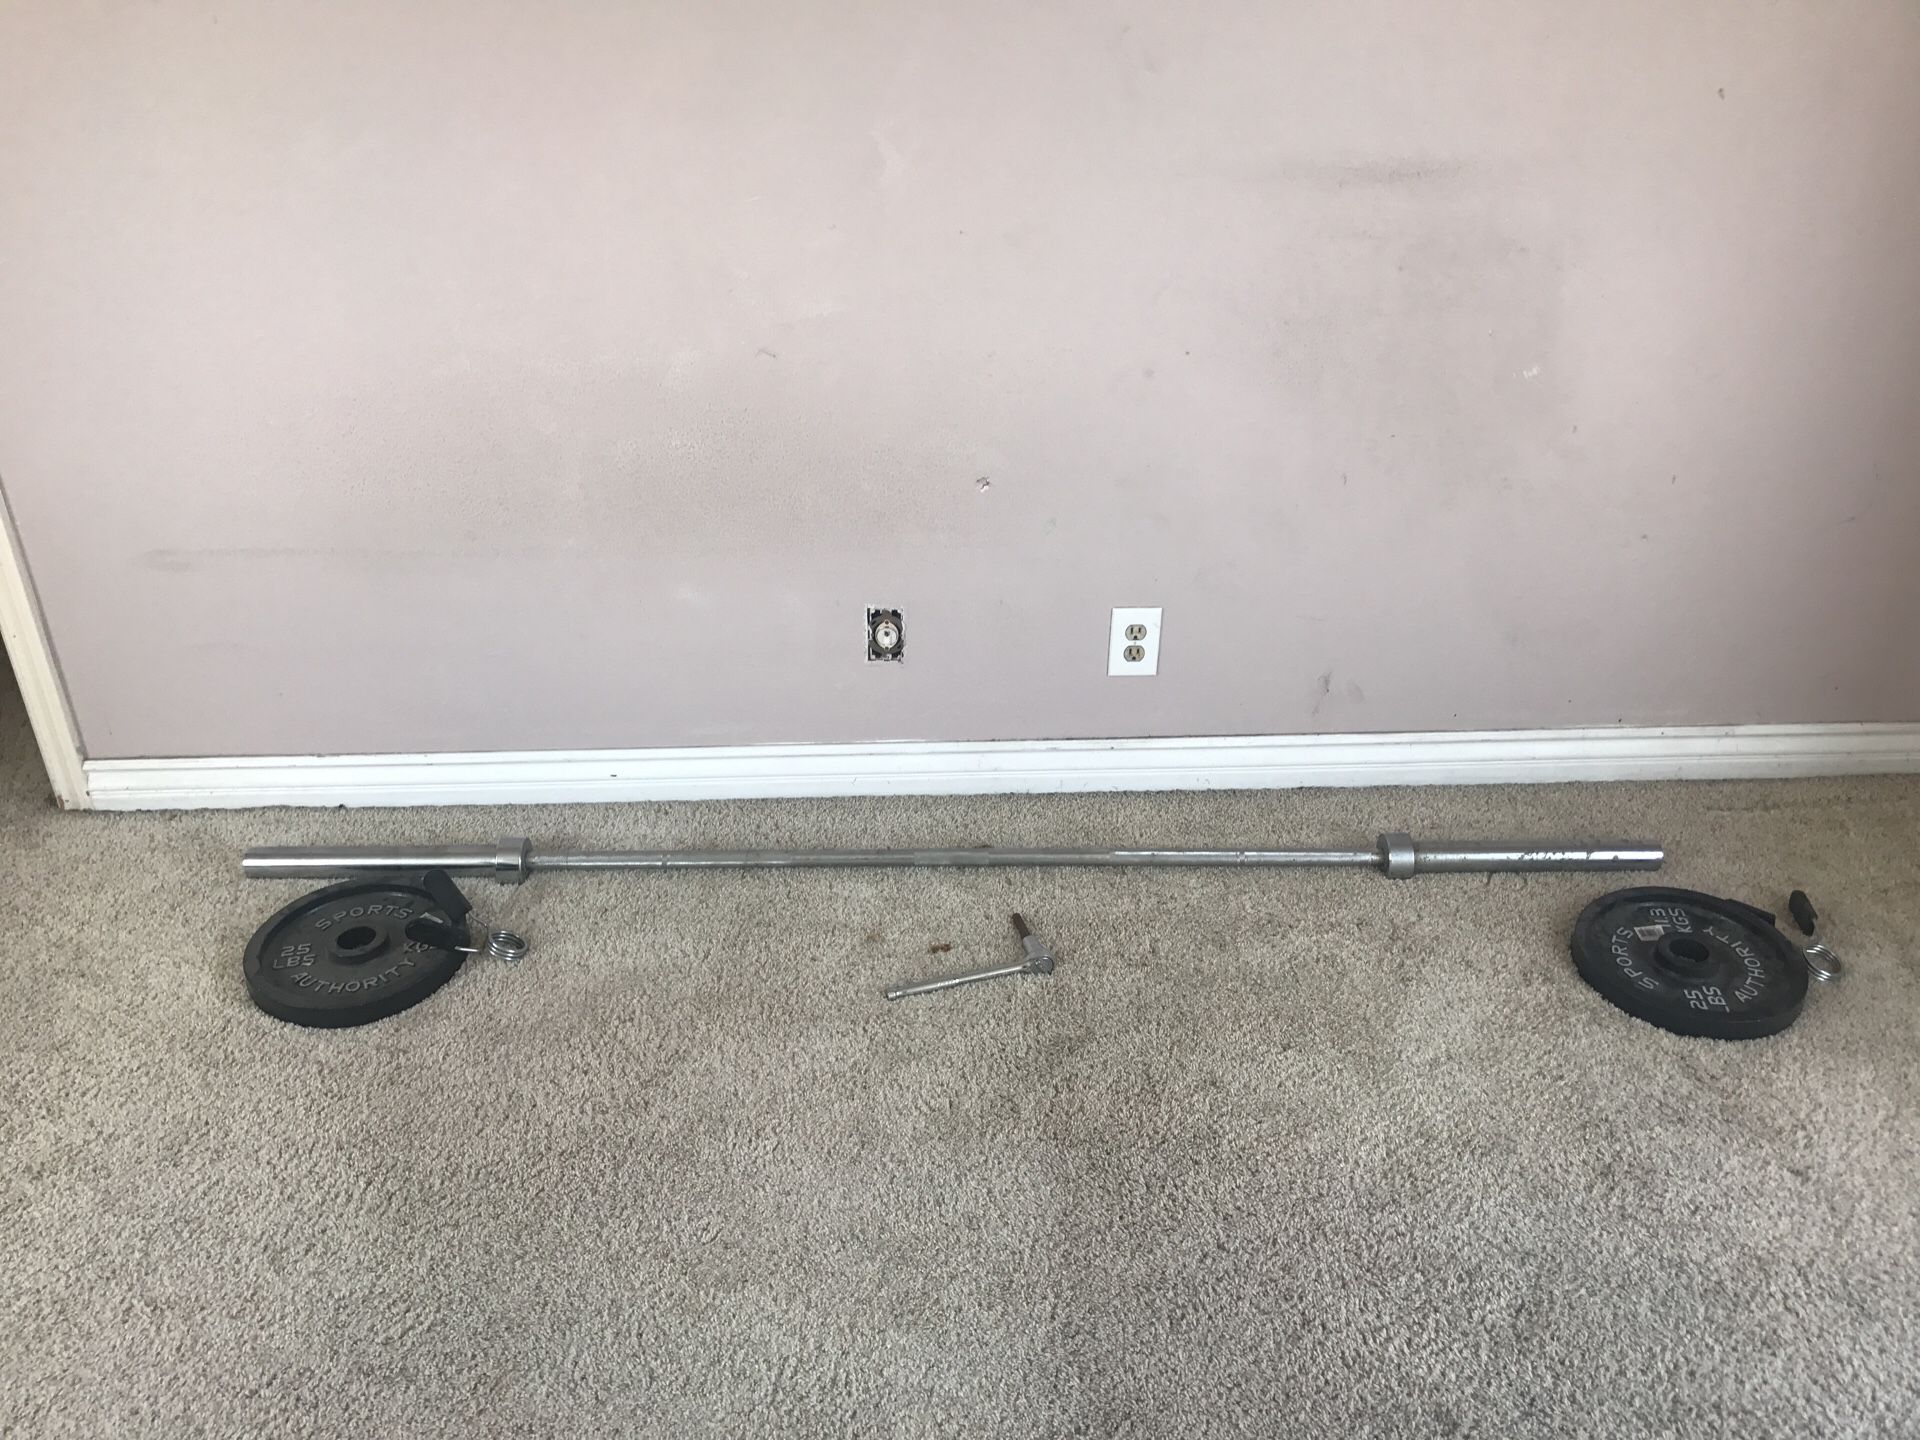 Barbell with 25 pound plates